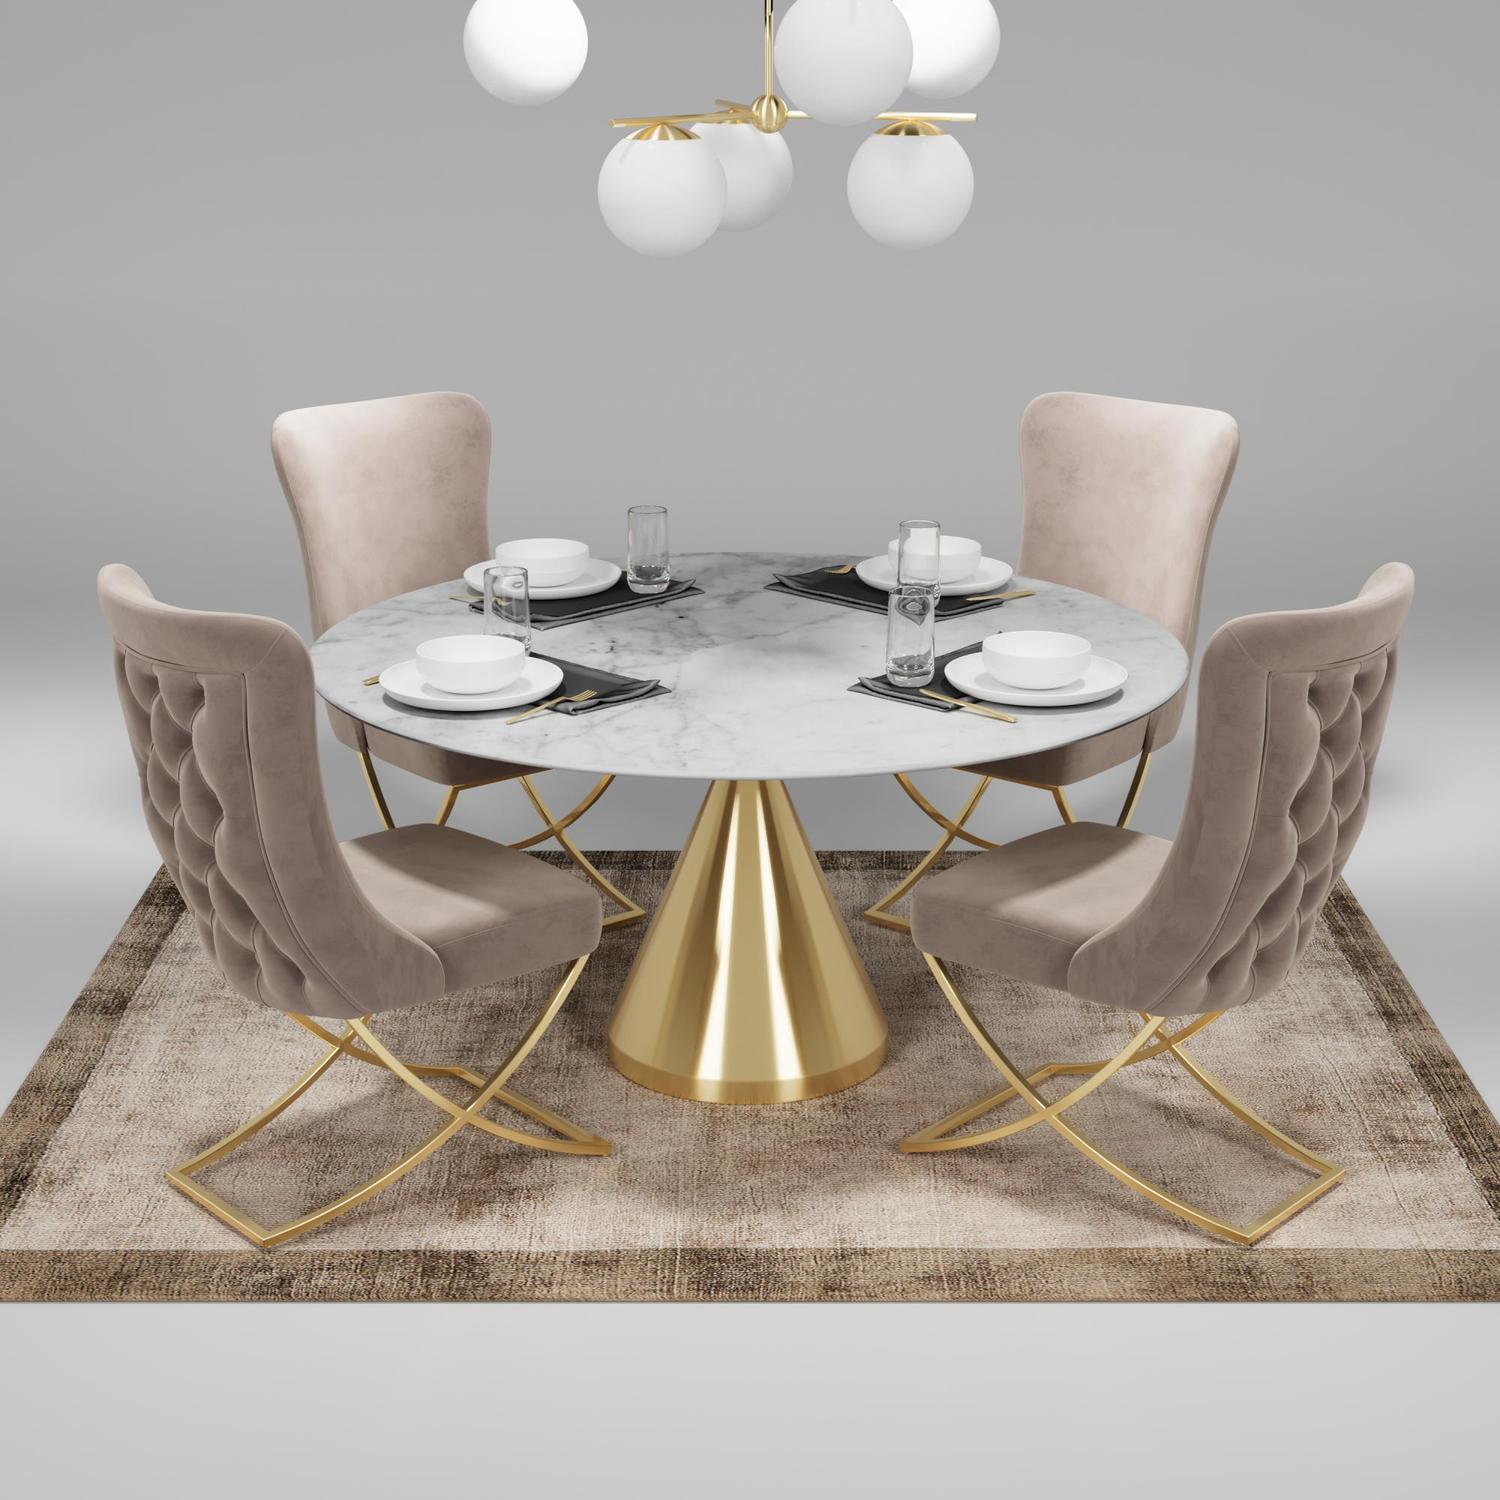 Sultan Collection Wing Back, Modern design, upholstered dining chair in Pearled Ivory with Gold Metal legs in a dining room with set of four chairs around a round table.